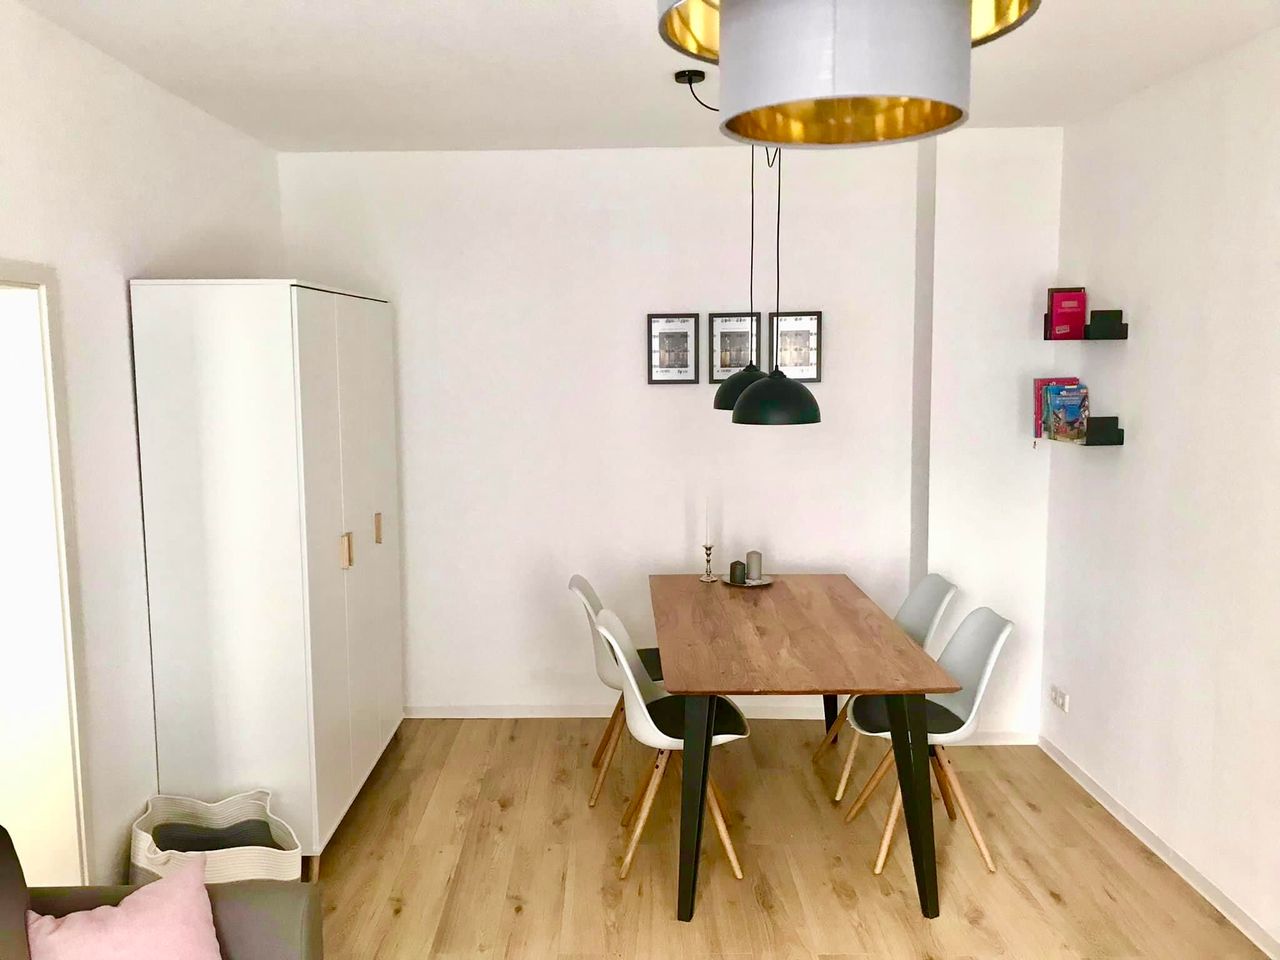 Apartment in the middle of the city with garden, barbecue, office desk, Netflix and printer